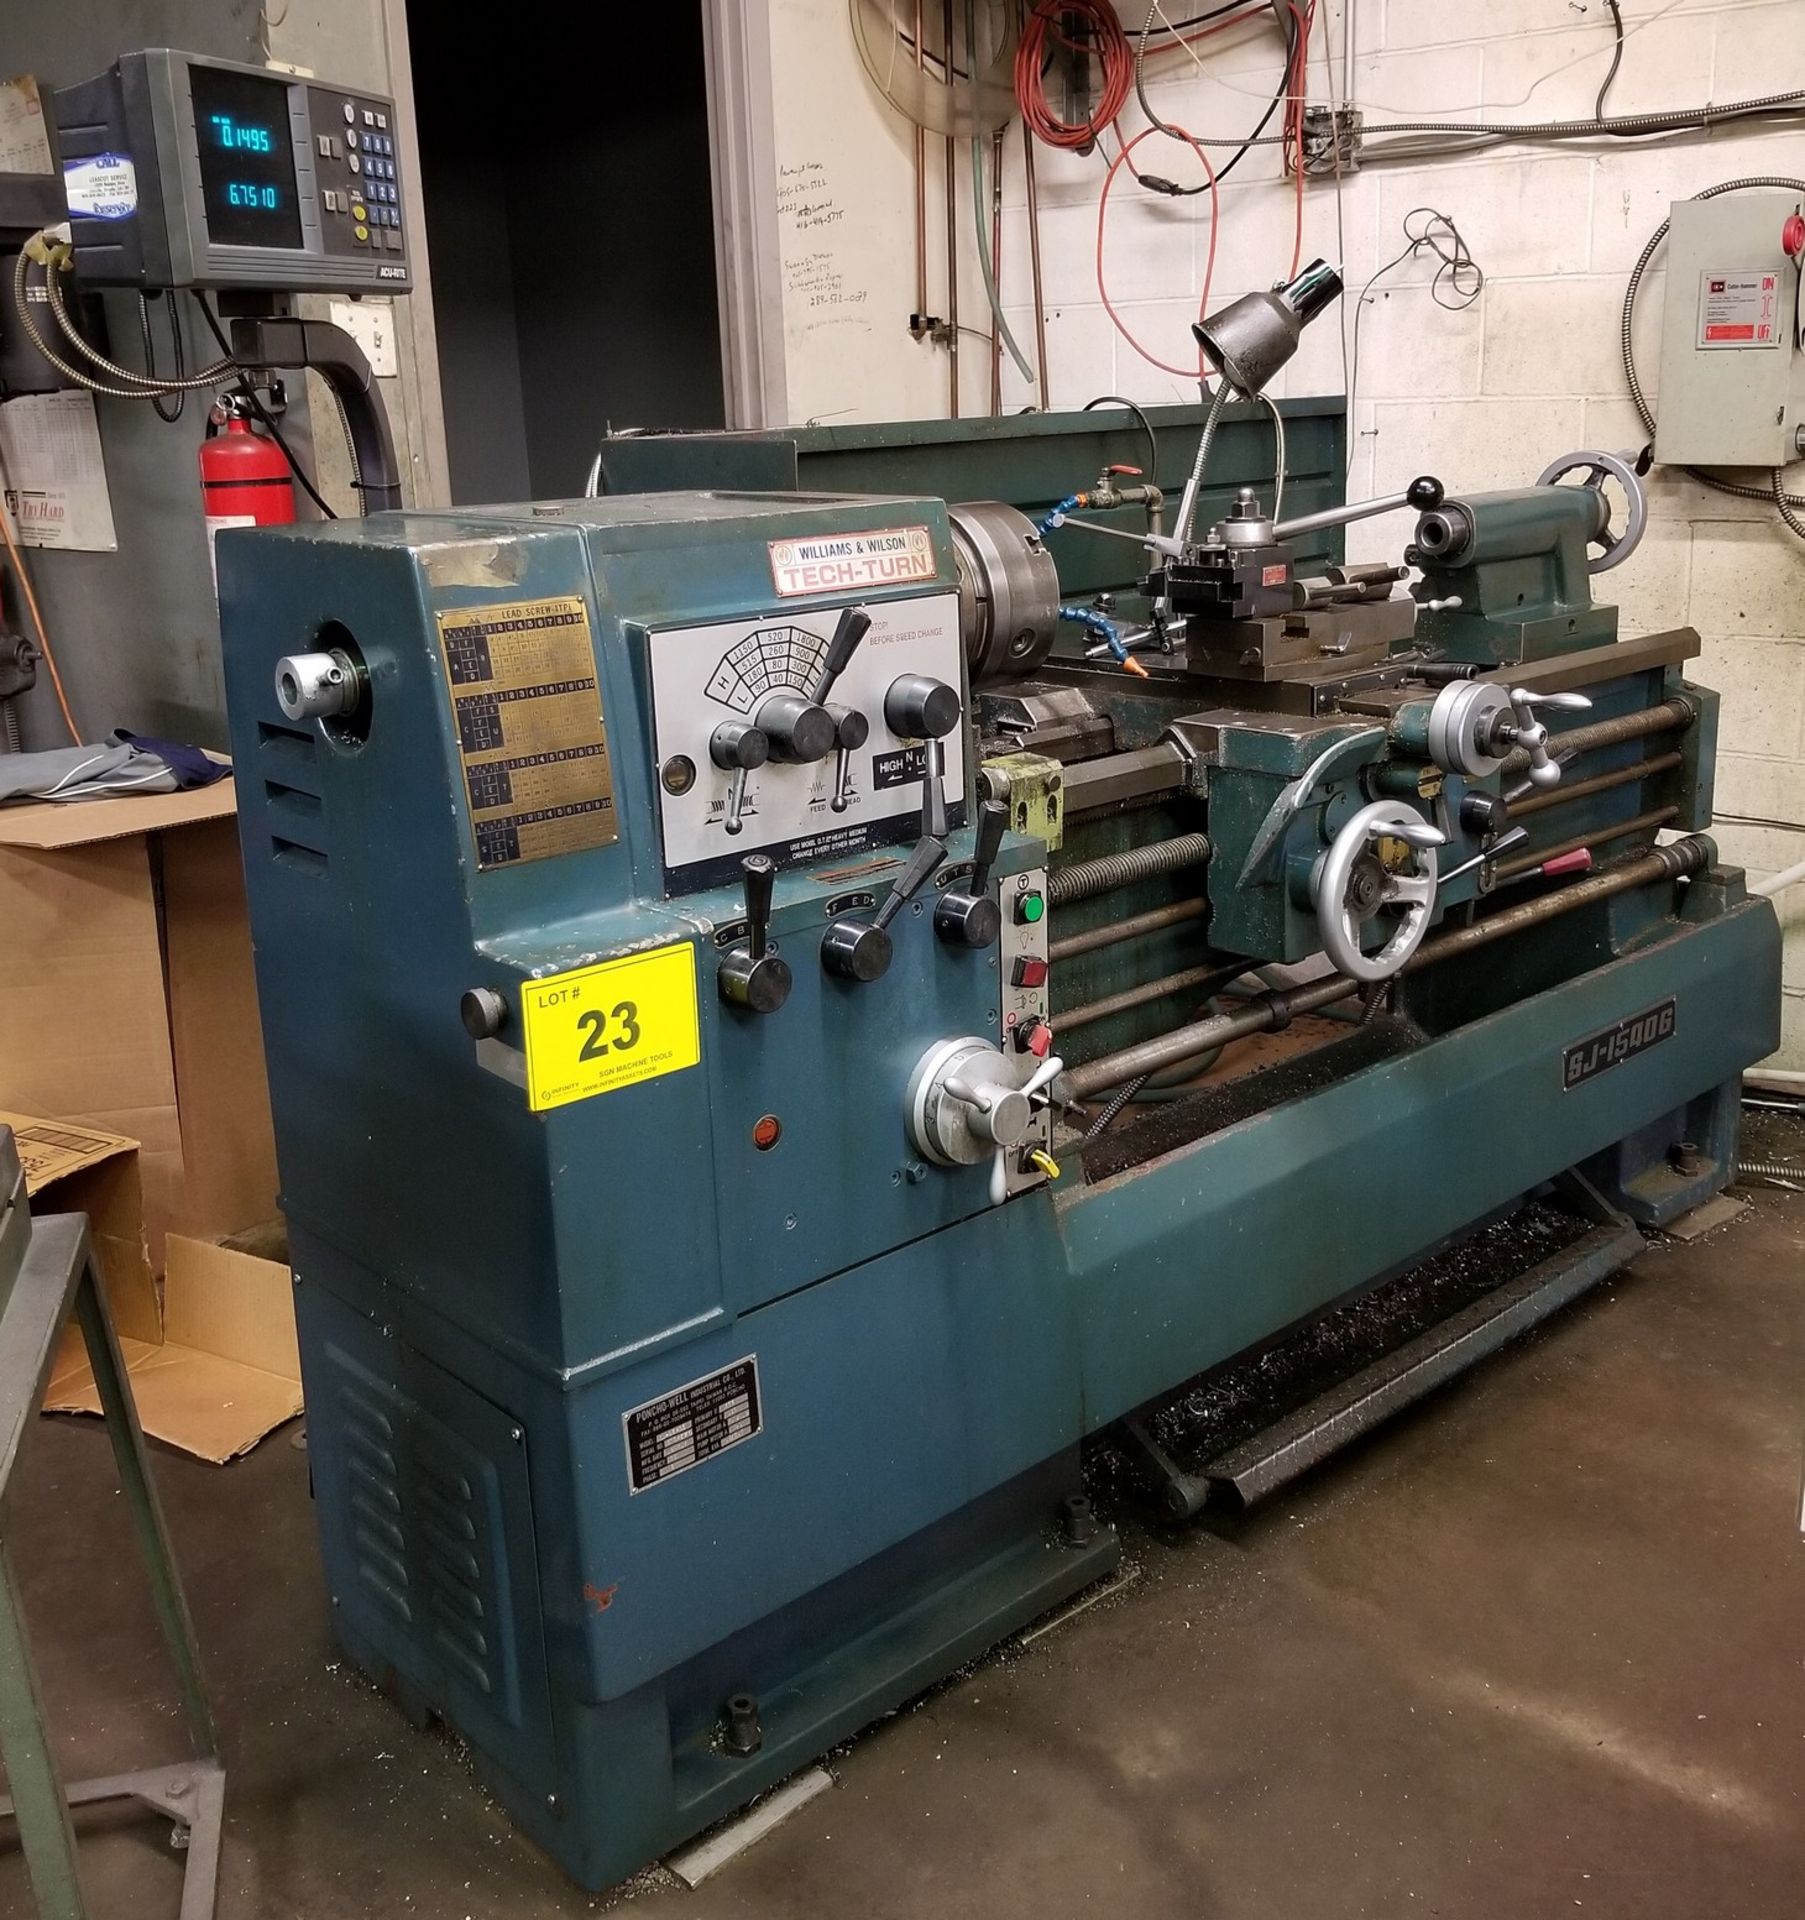 PONCHO-WELL SJ-1540G LATHE, ACU-RITE 2-AXIS DRO, 8” 3-JAW CHUCK, TAILSTOCK, TOOL POST, S/N 57043941 - Image 2 of 12